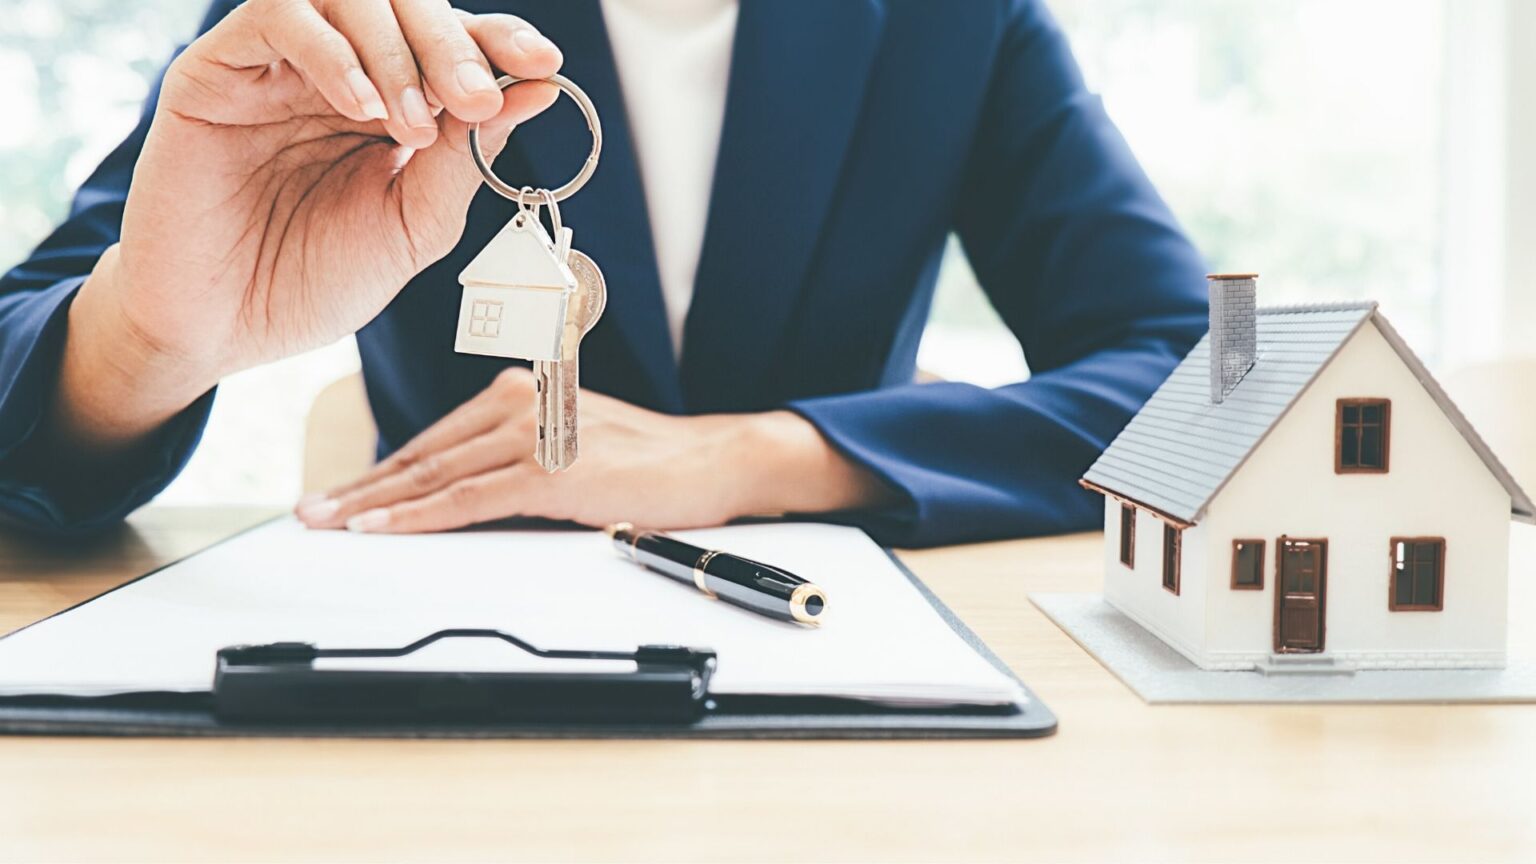 The real estate market is a hotbed for investment and financial opportunities. Here's how you can unlock profit potential.